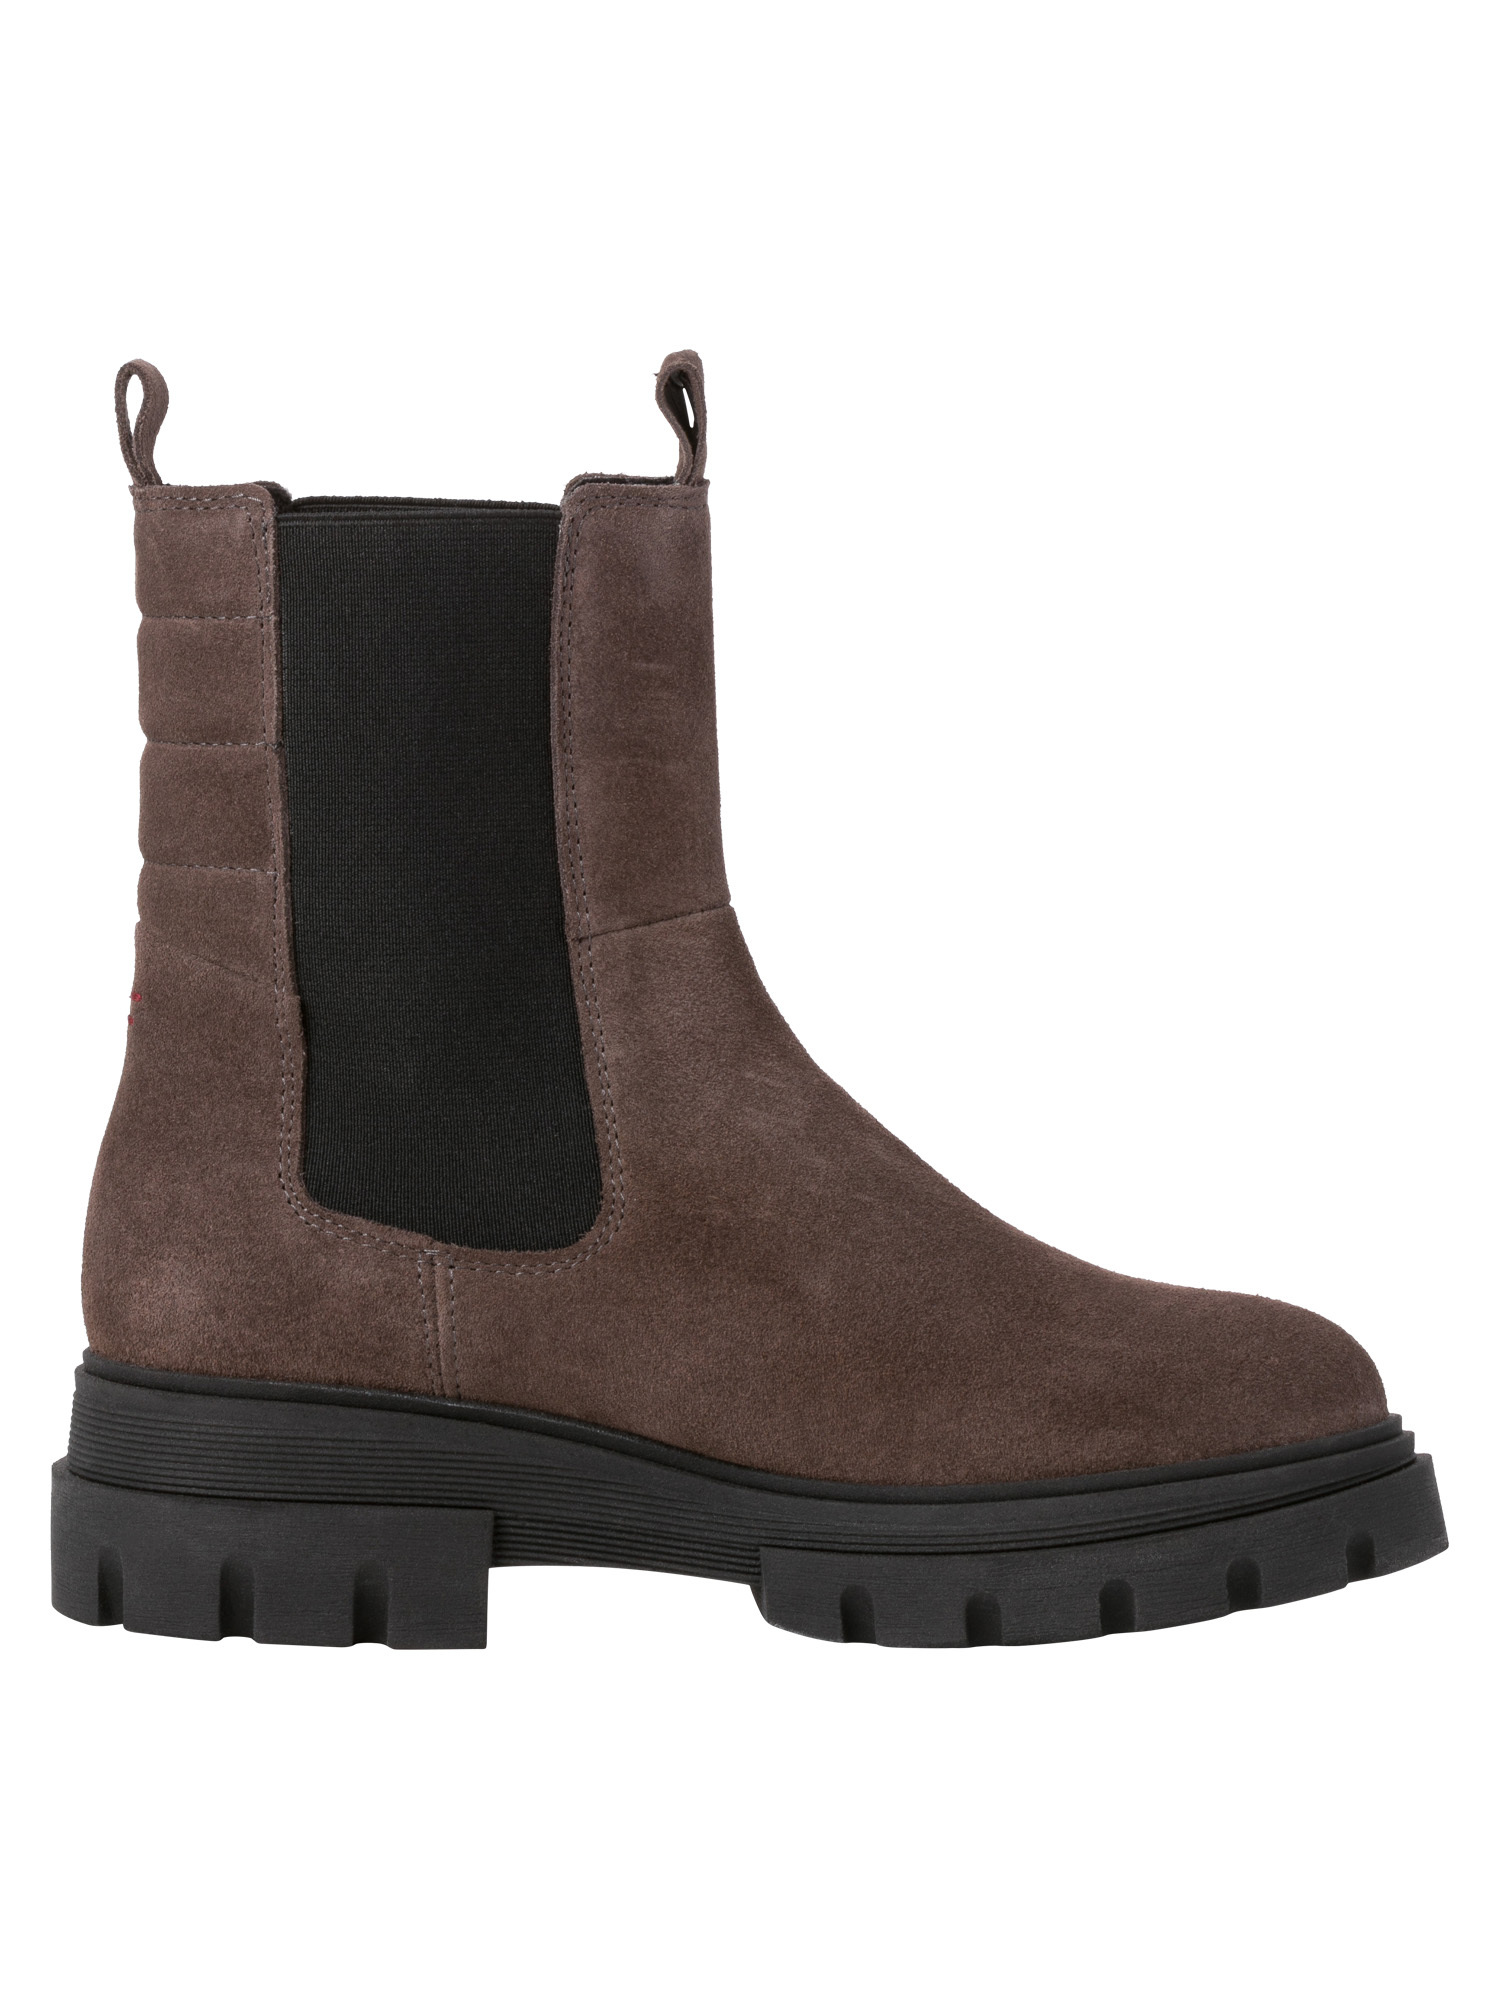 s.Oliver Chelsea Boots in Mokka 